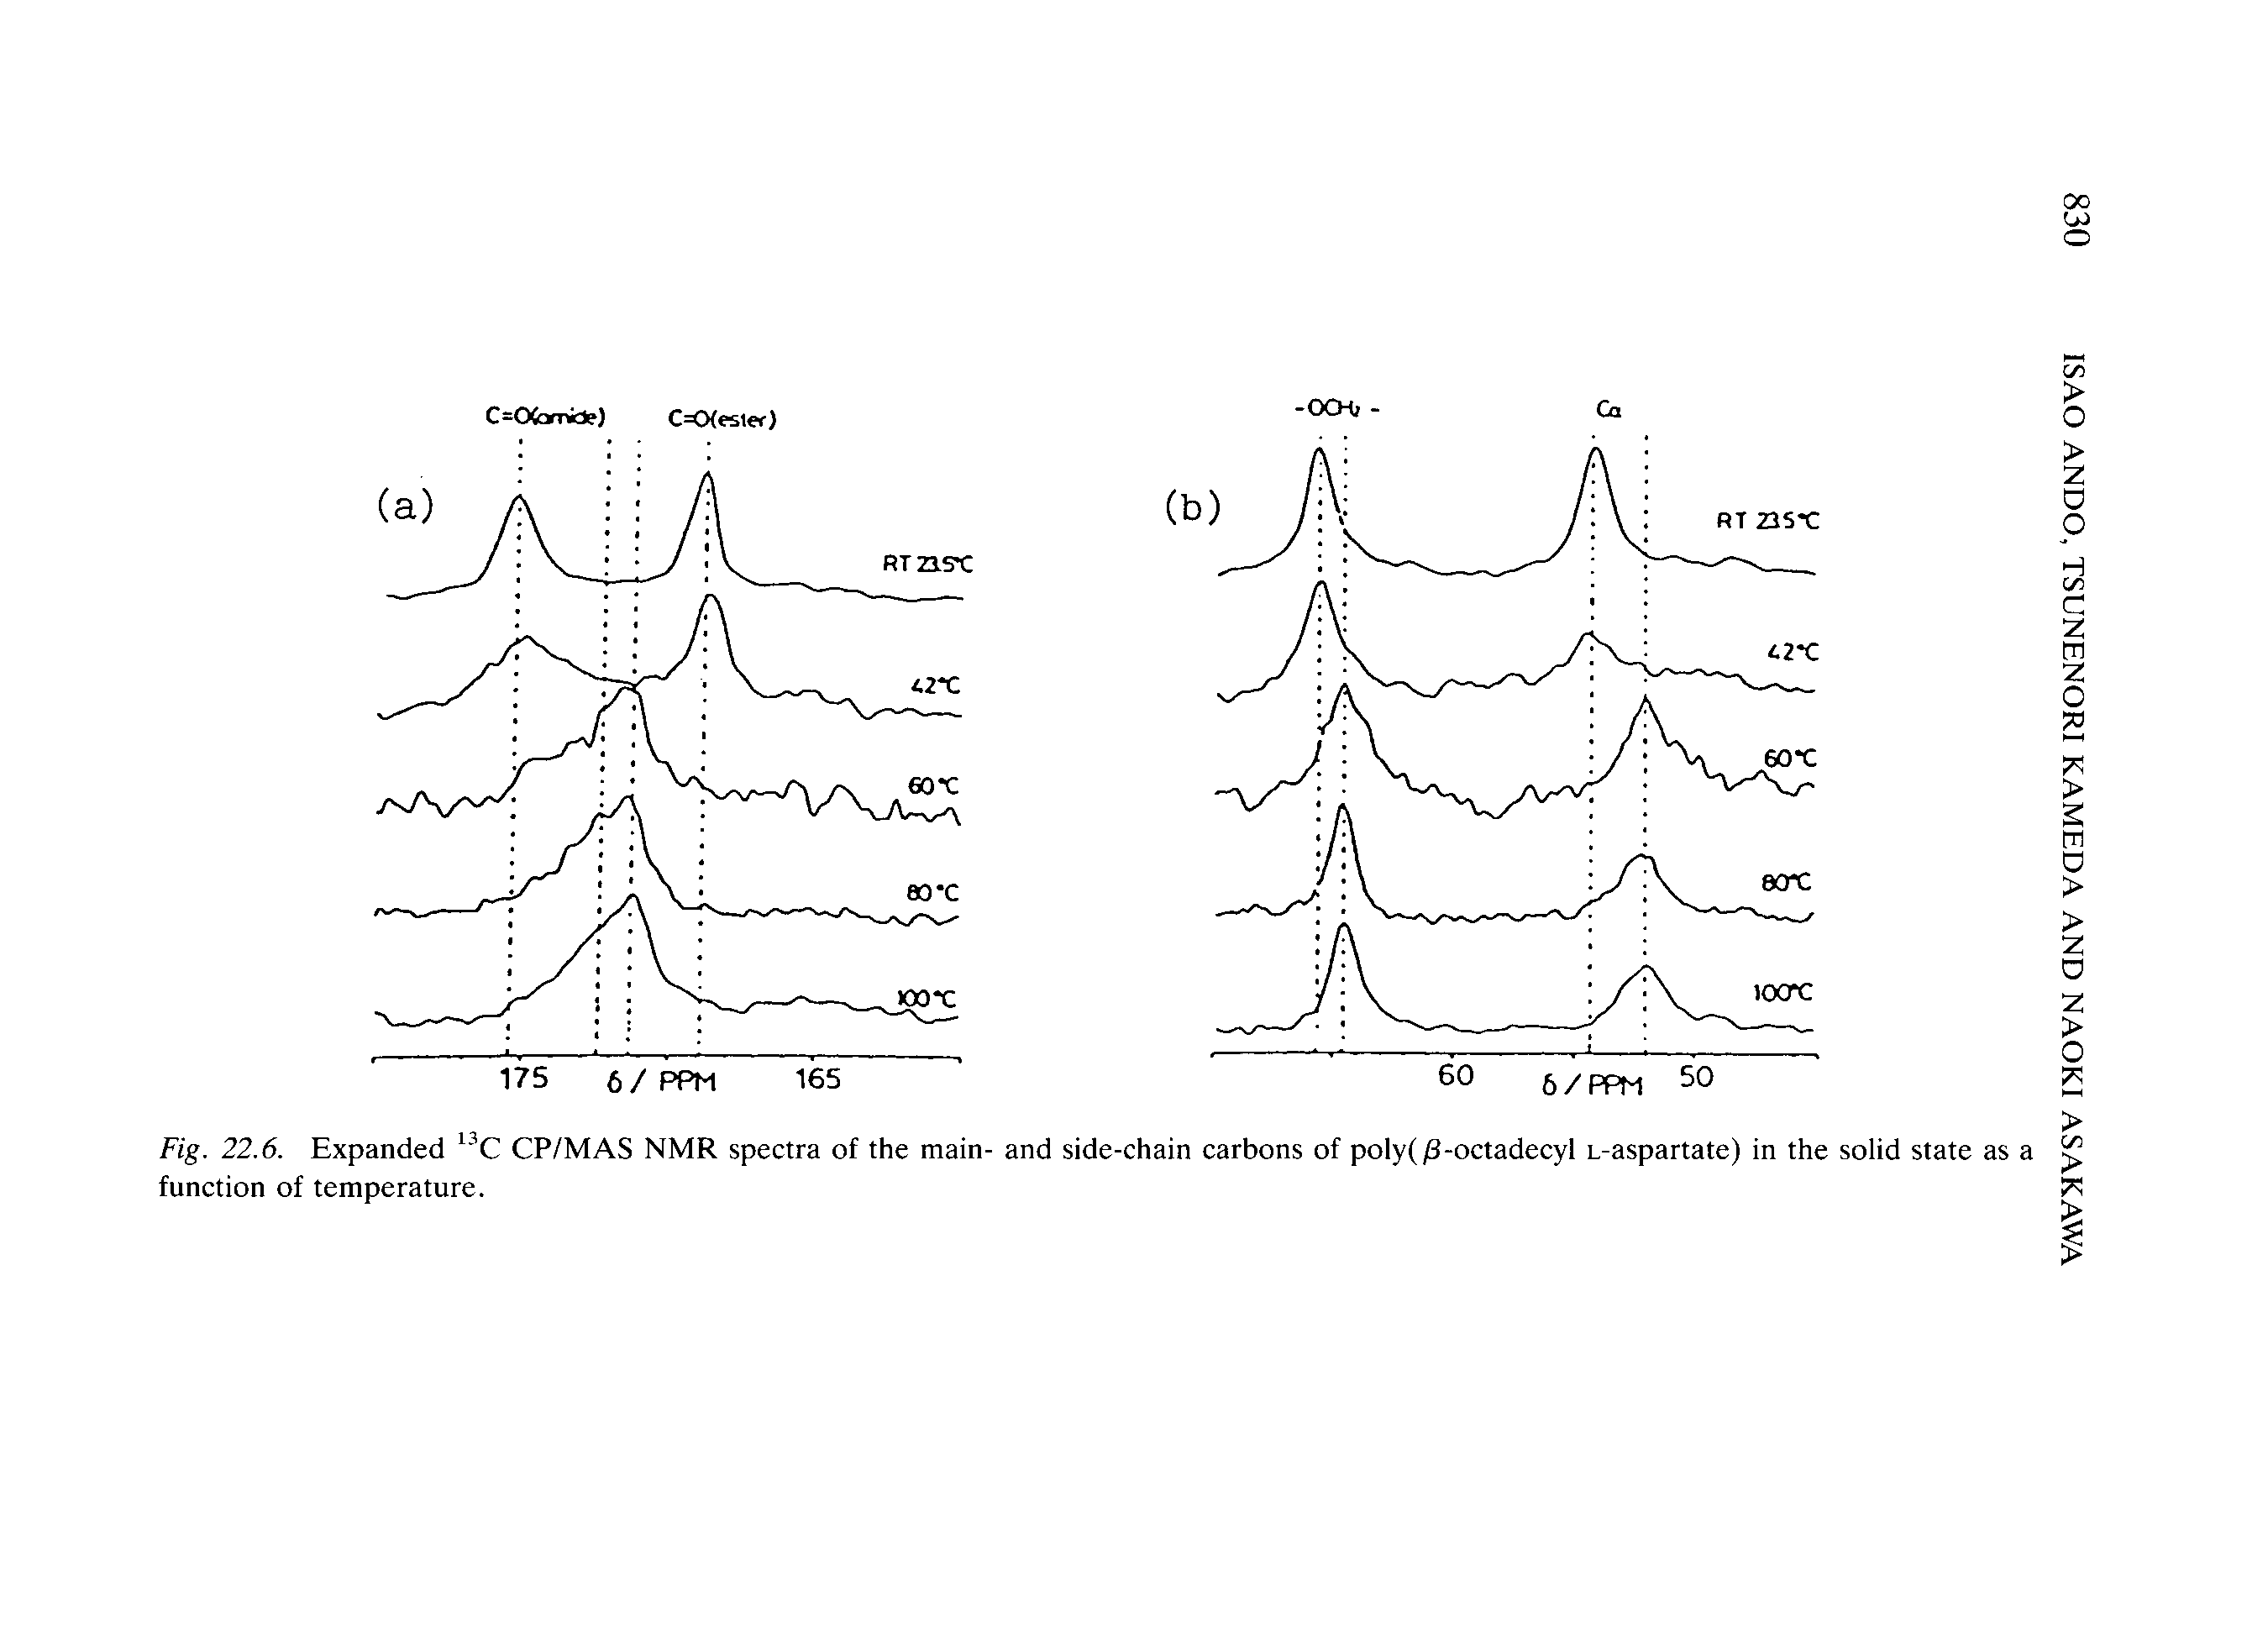 Fig. 22.6. Expanded CP/MAS NMR spectra of the main- and side-chain carbons of poly( 3-octadecyl L-aspartate) in the solid state as a function of temperature.